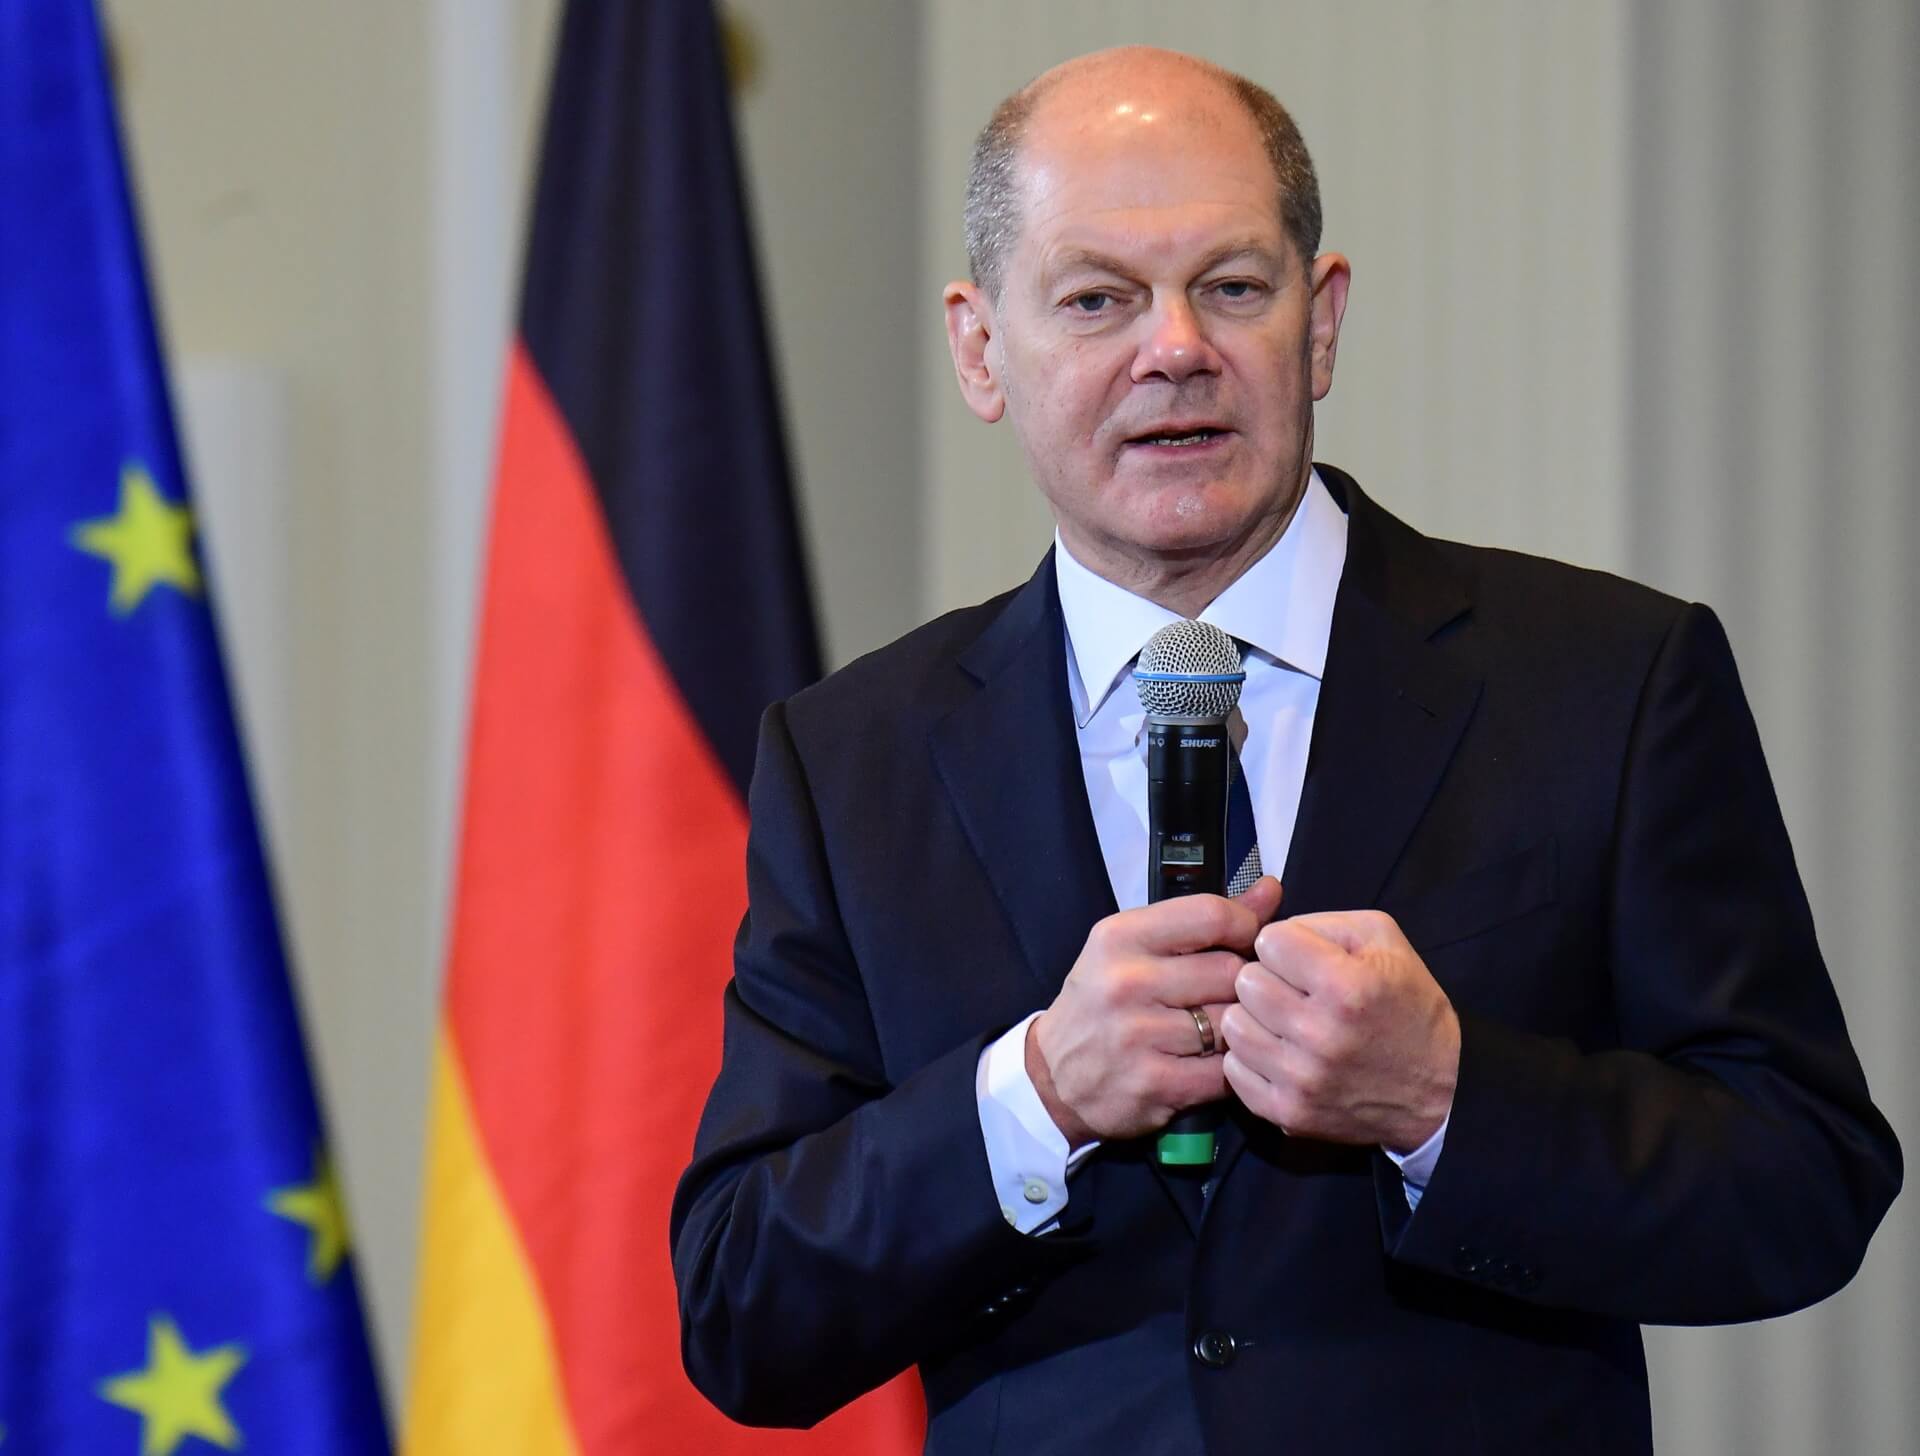 German Chancellor Scholz Avoids Airing Human Rights Concerns in First Call With China’s Xi